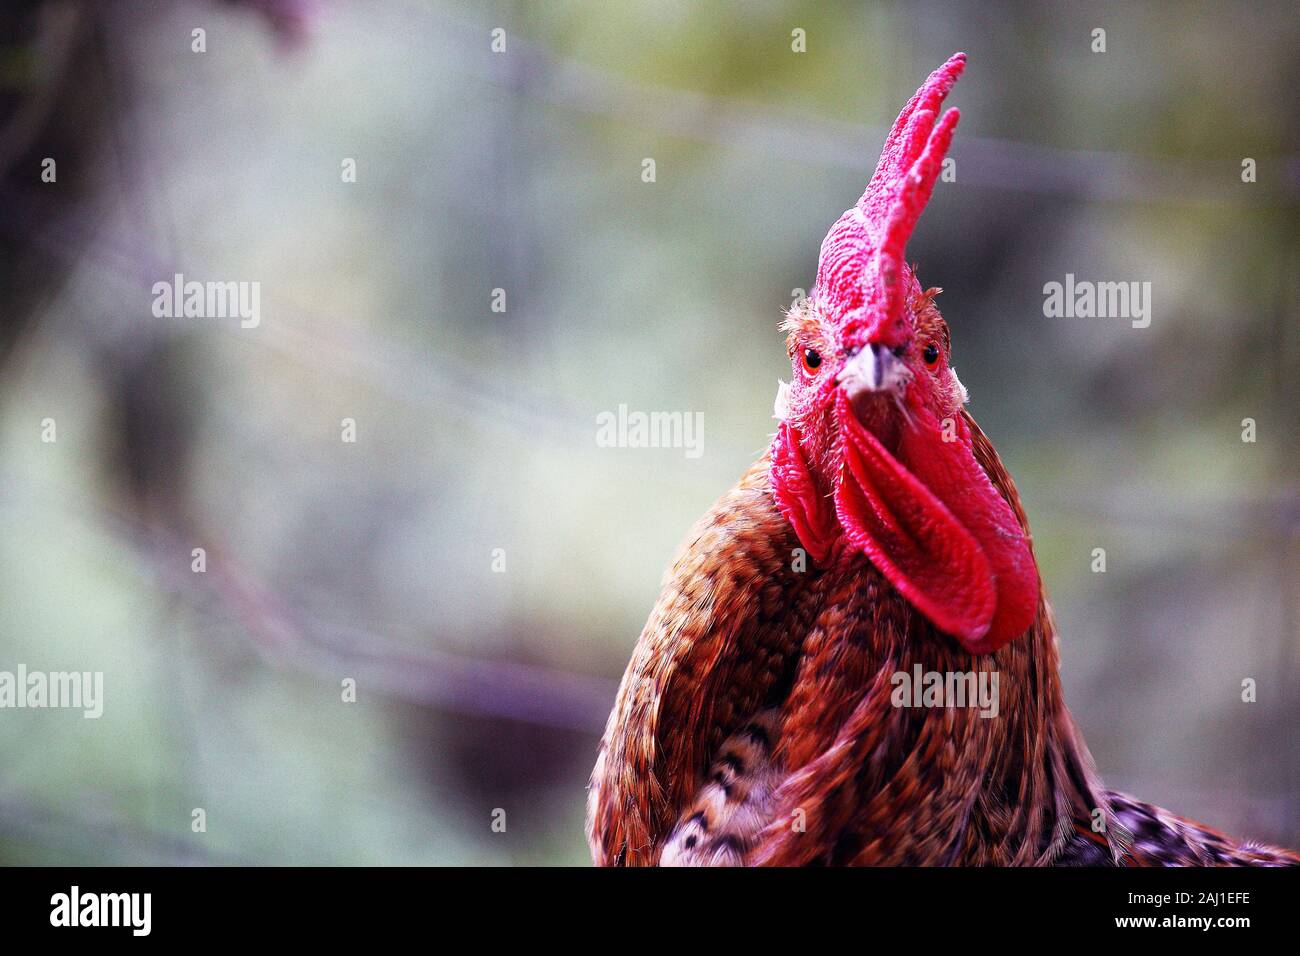 Poultry rooster with a very striking red crest Stock Photo